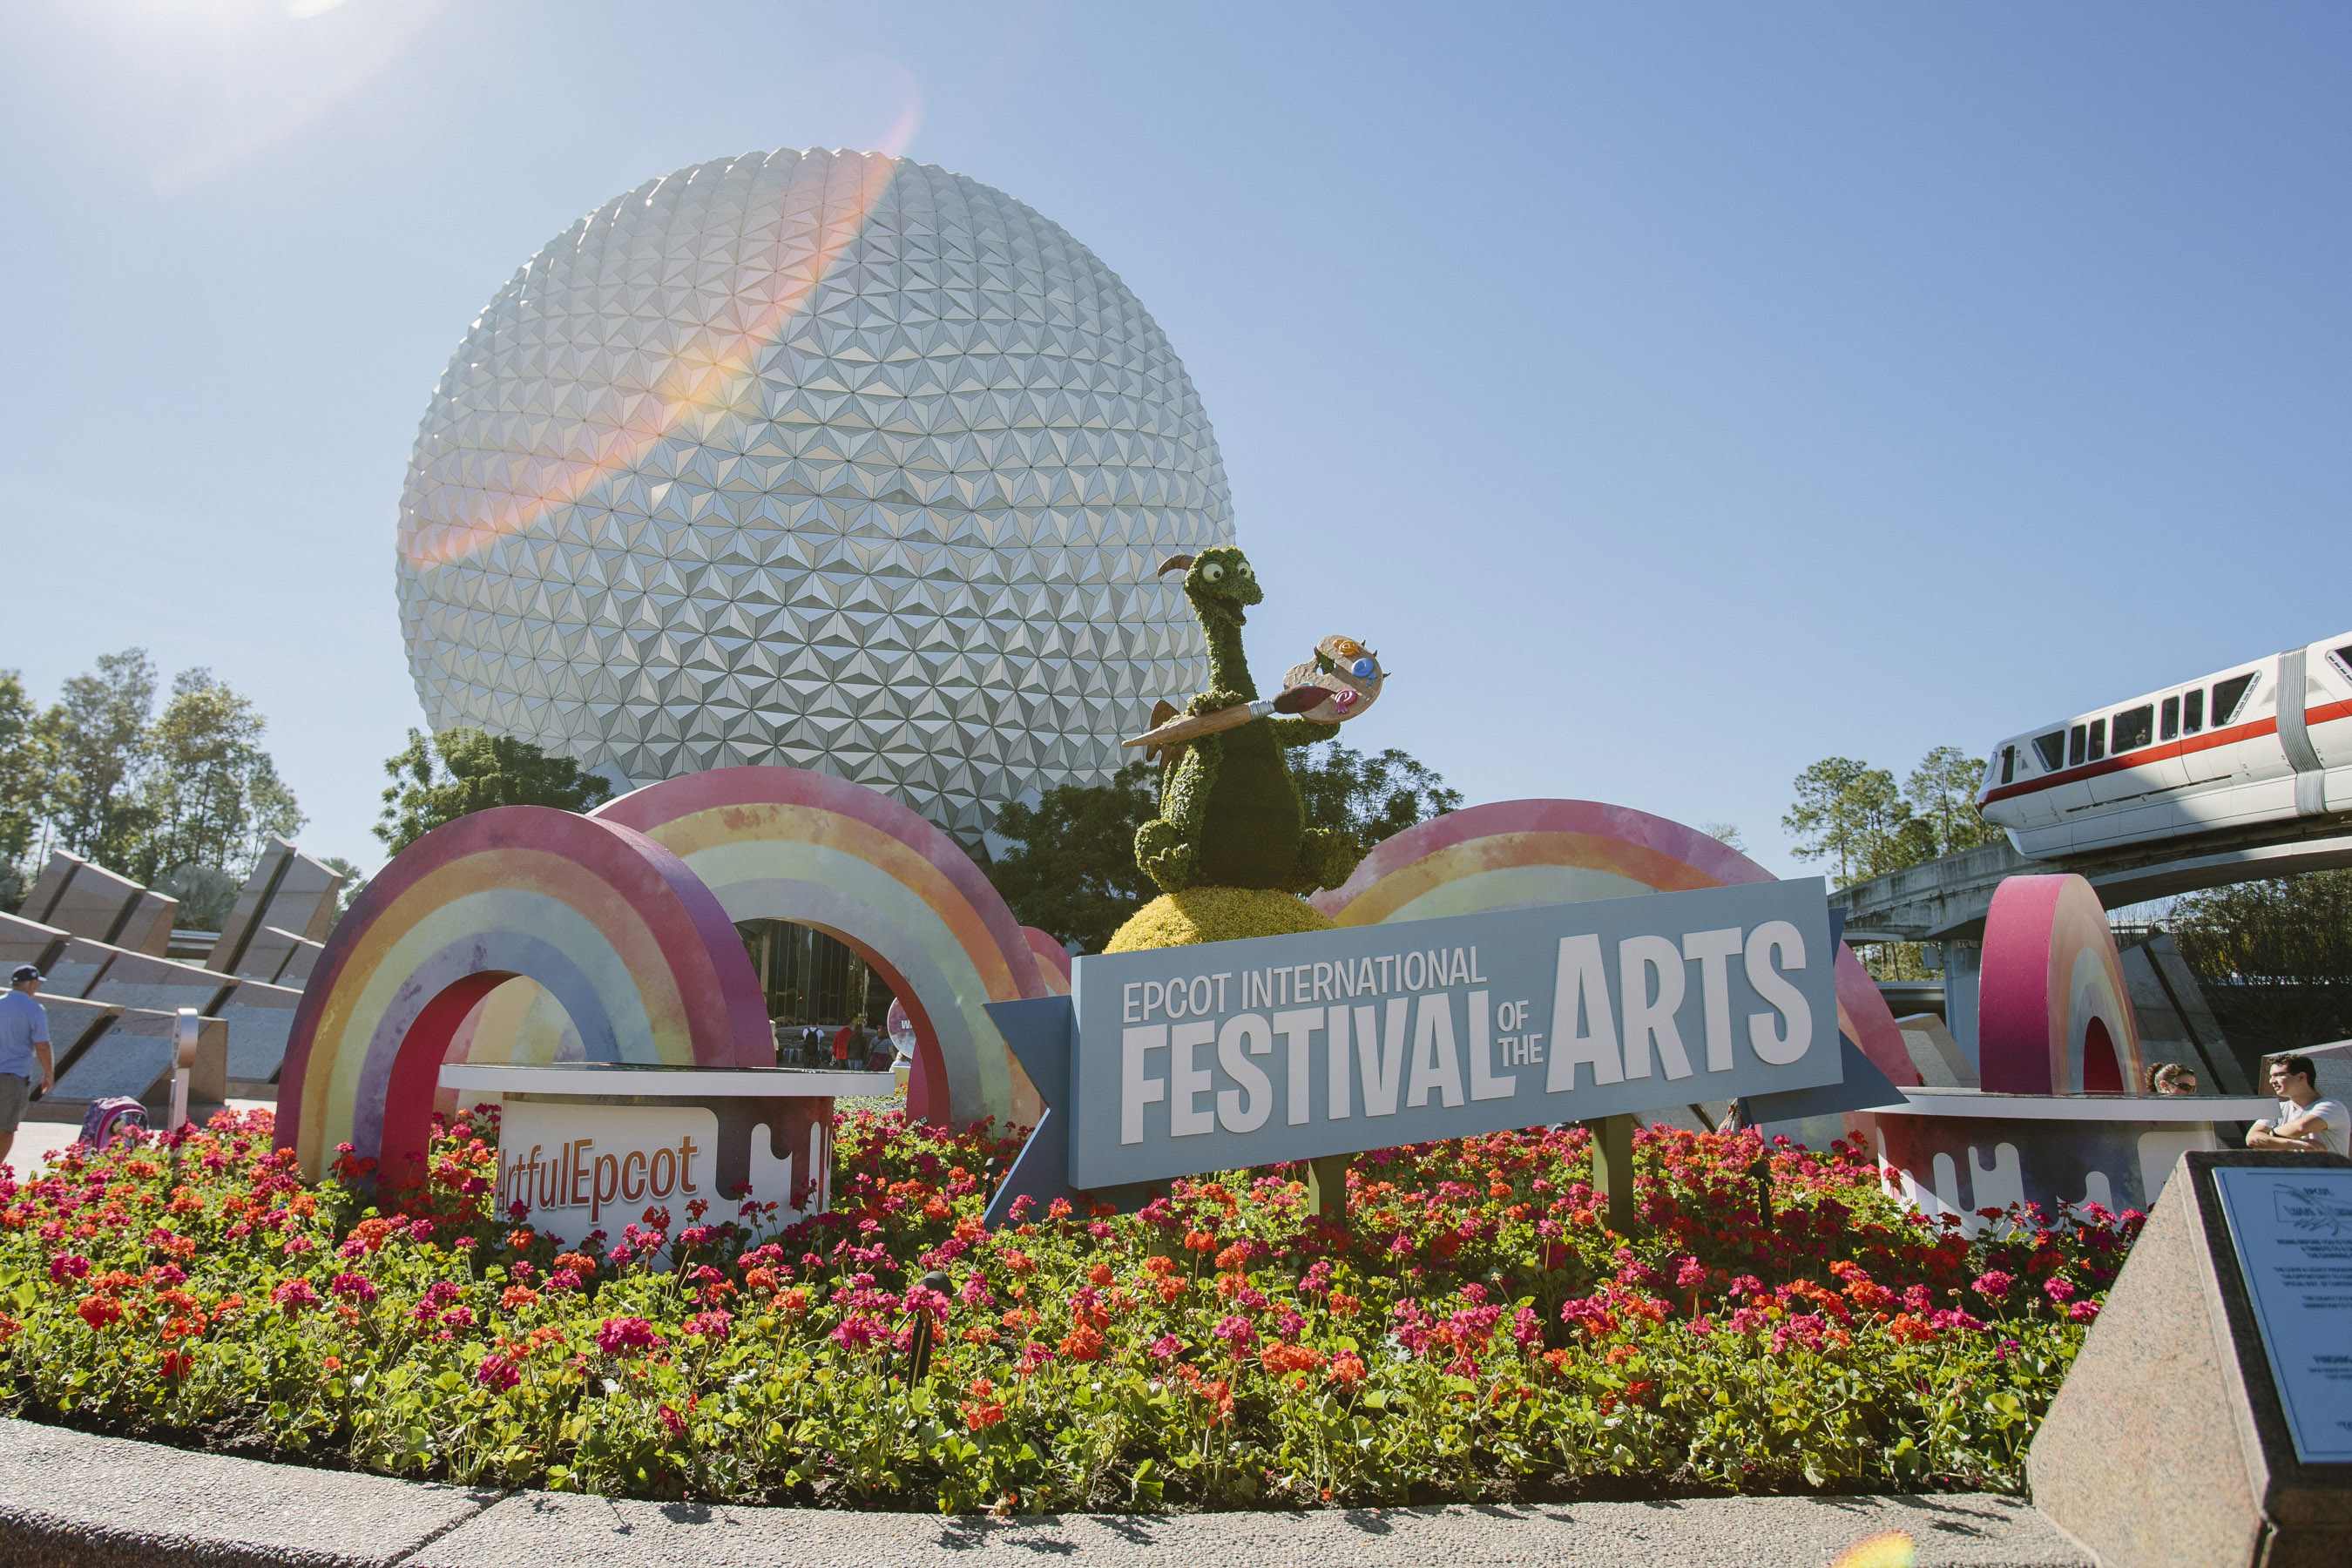 Four Signature Epcot Festivals Welcome Guests to Walt Disney World Resort in 2019